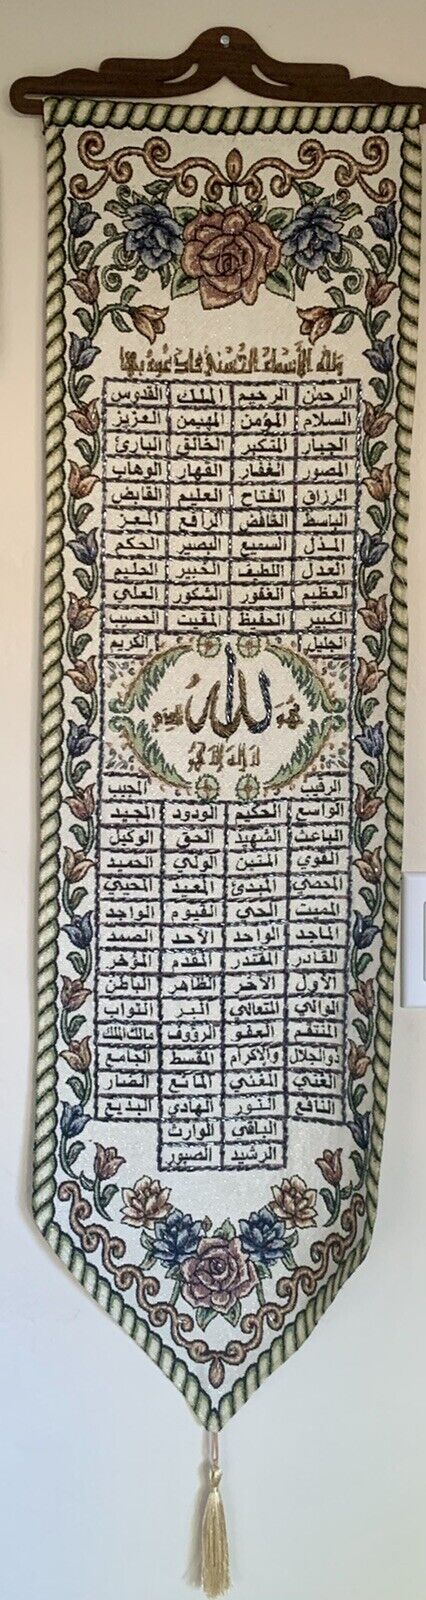 100 names Of Allah, Islamic Wall Decoration With Glitter And Handiwork.